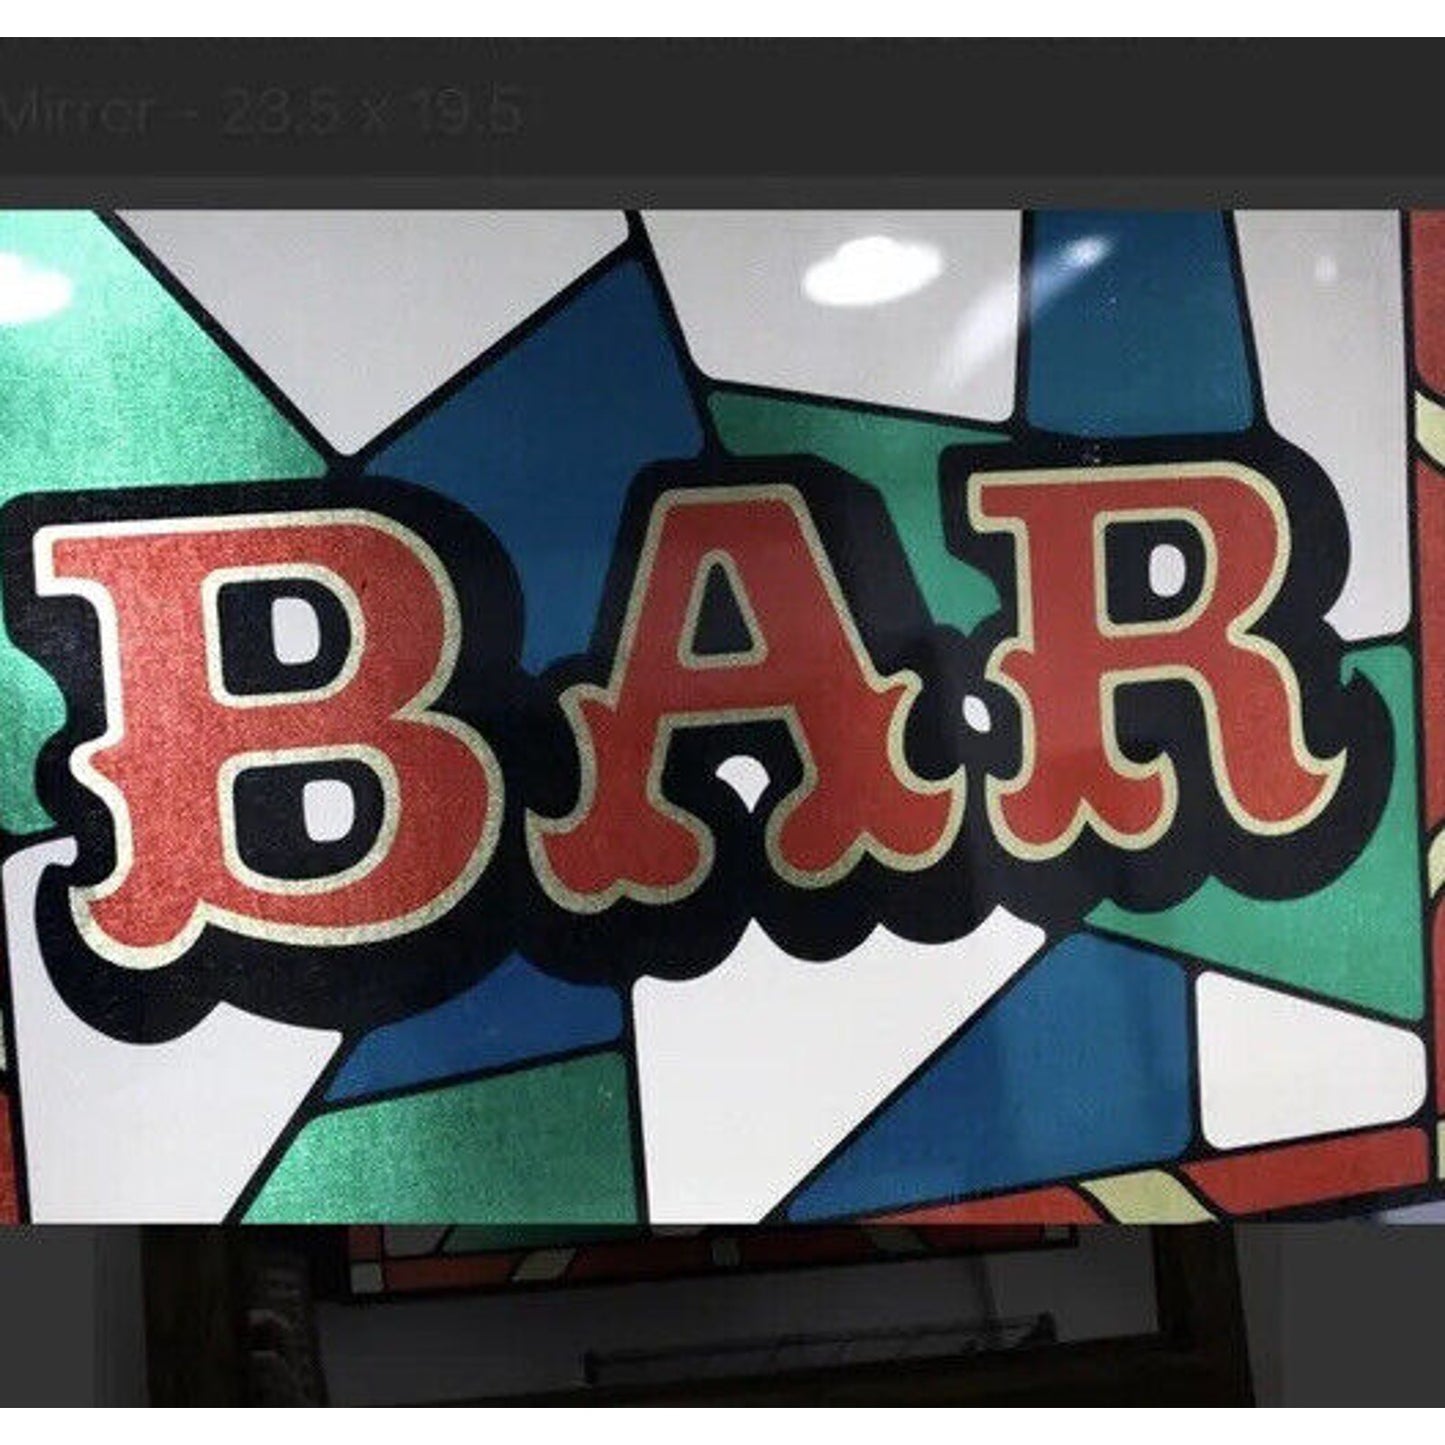 Framed BAR Spellout Mirrored Sign Man Cave Bar Decor Faux Woods 23.5"x19.5"